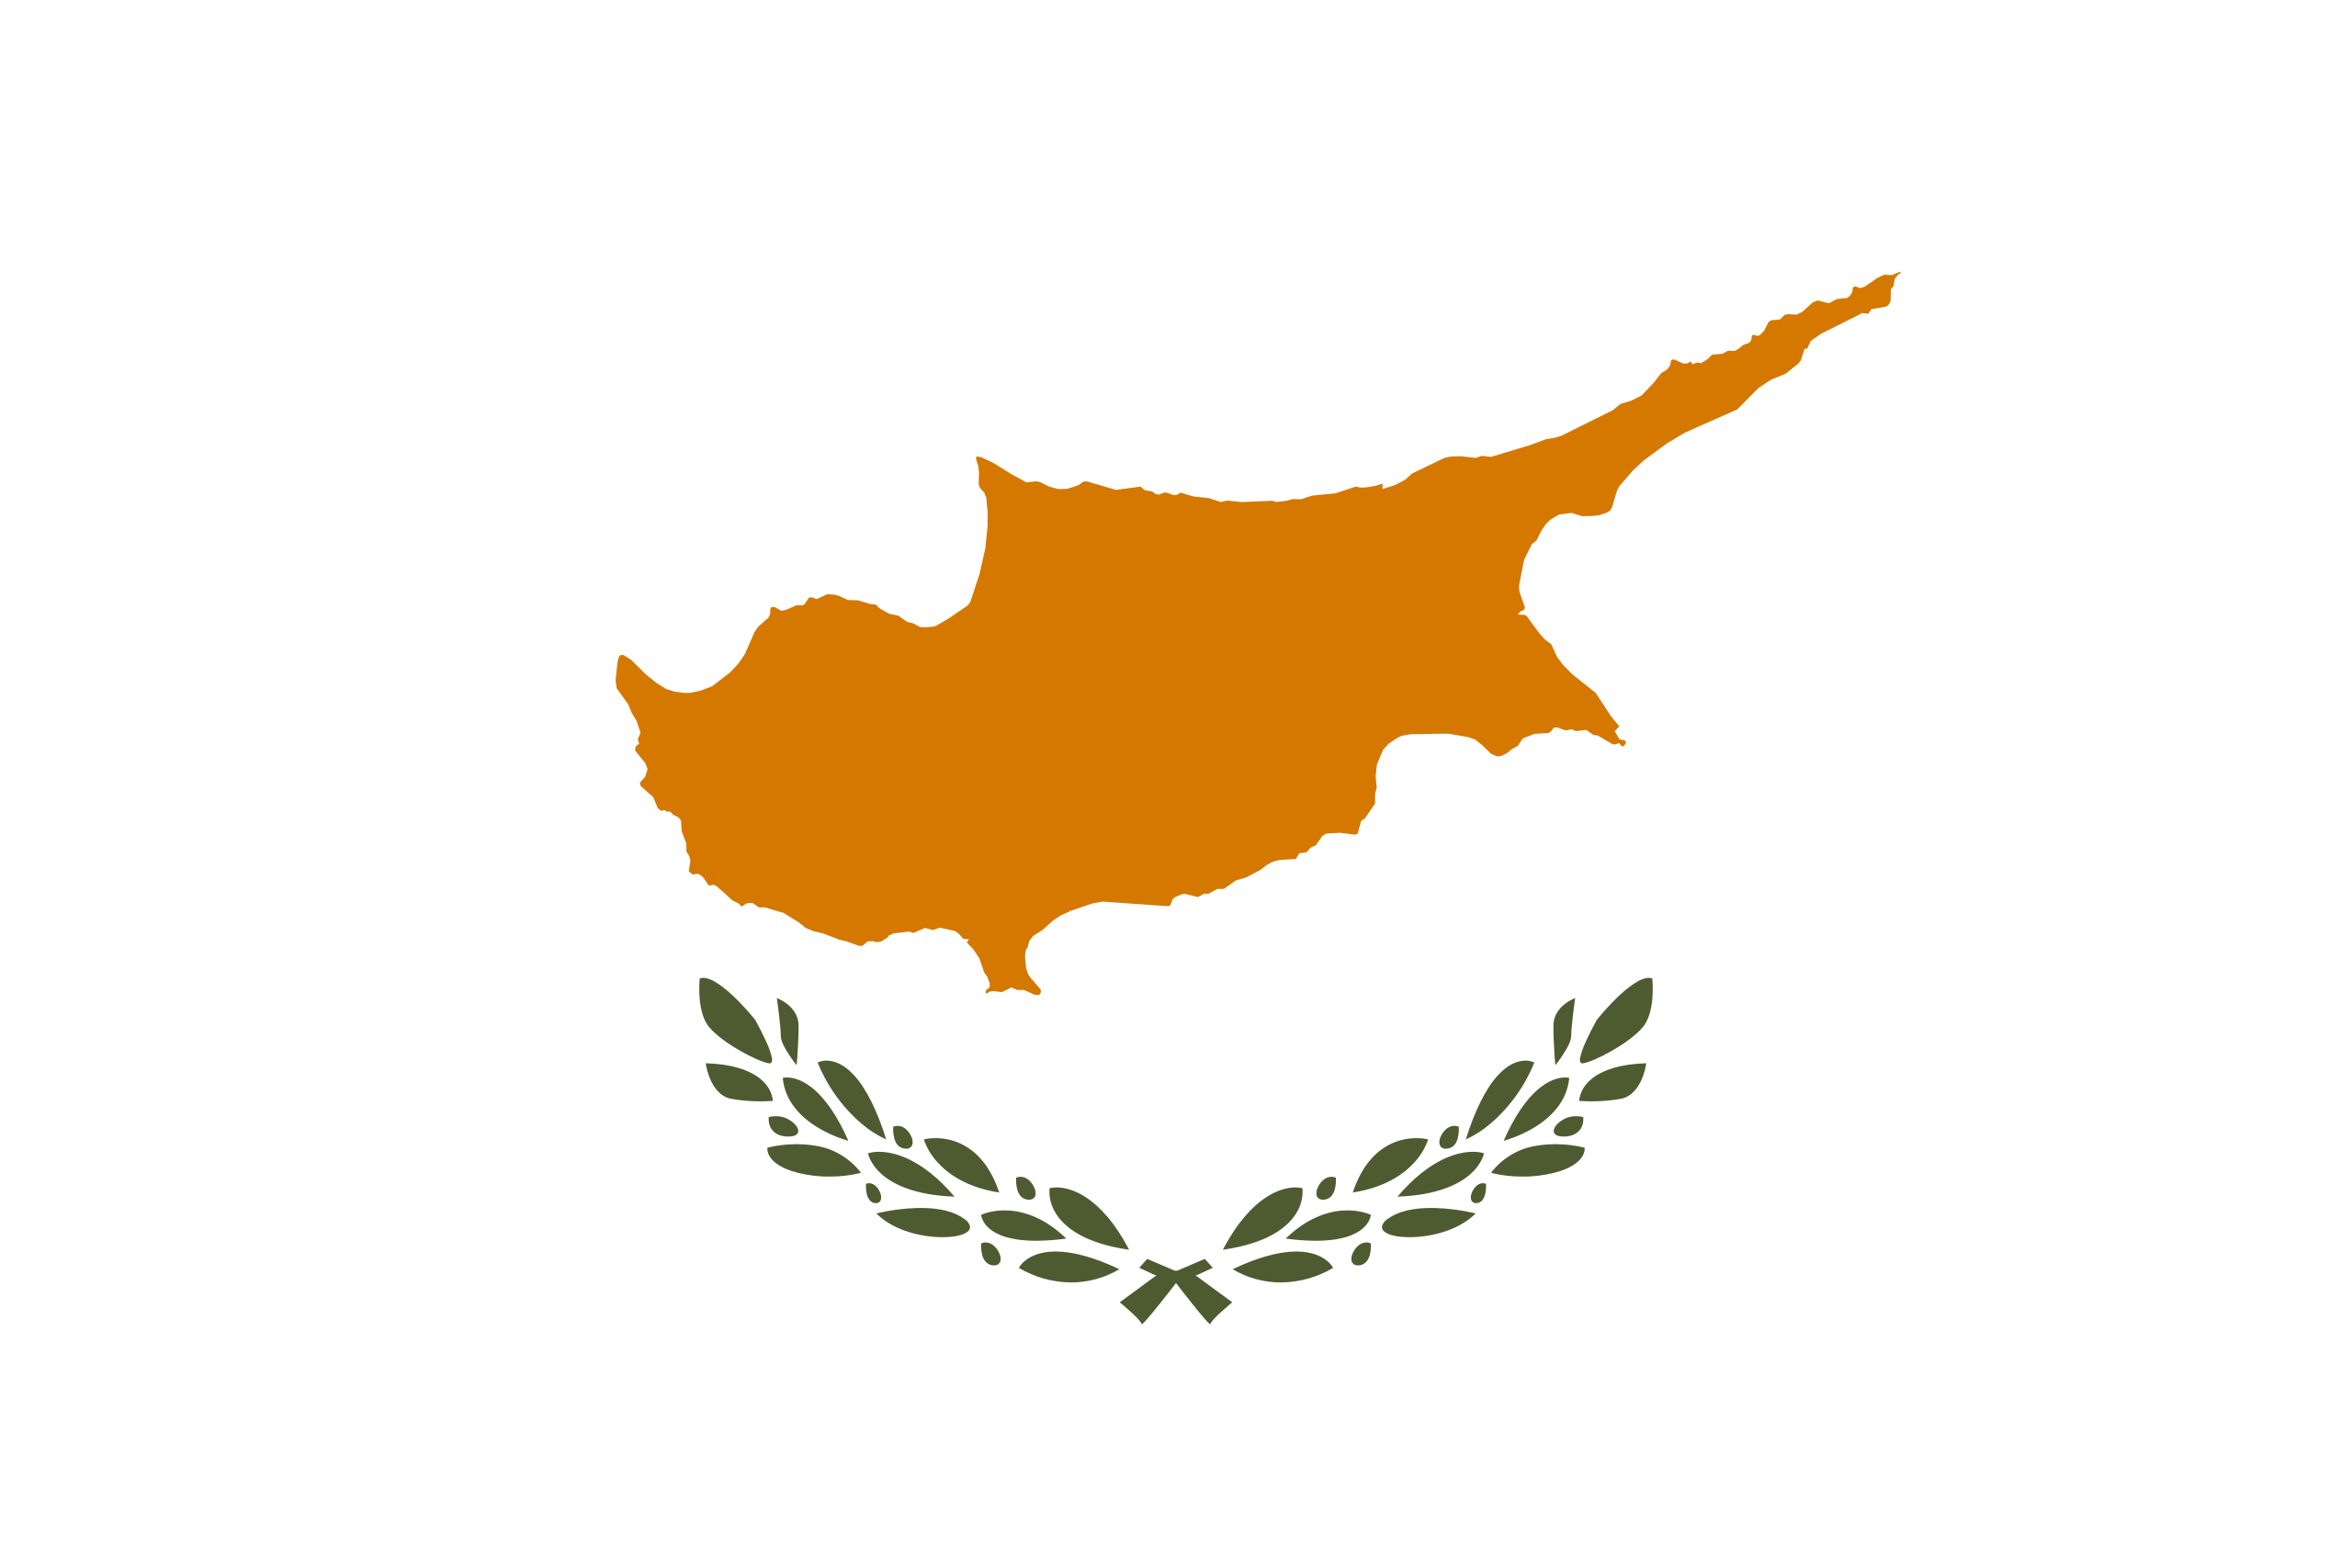 Cyprus: Witness the reveal of the Cypriot entry today!